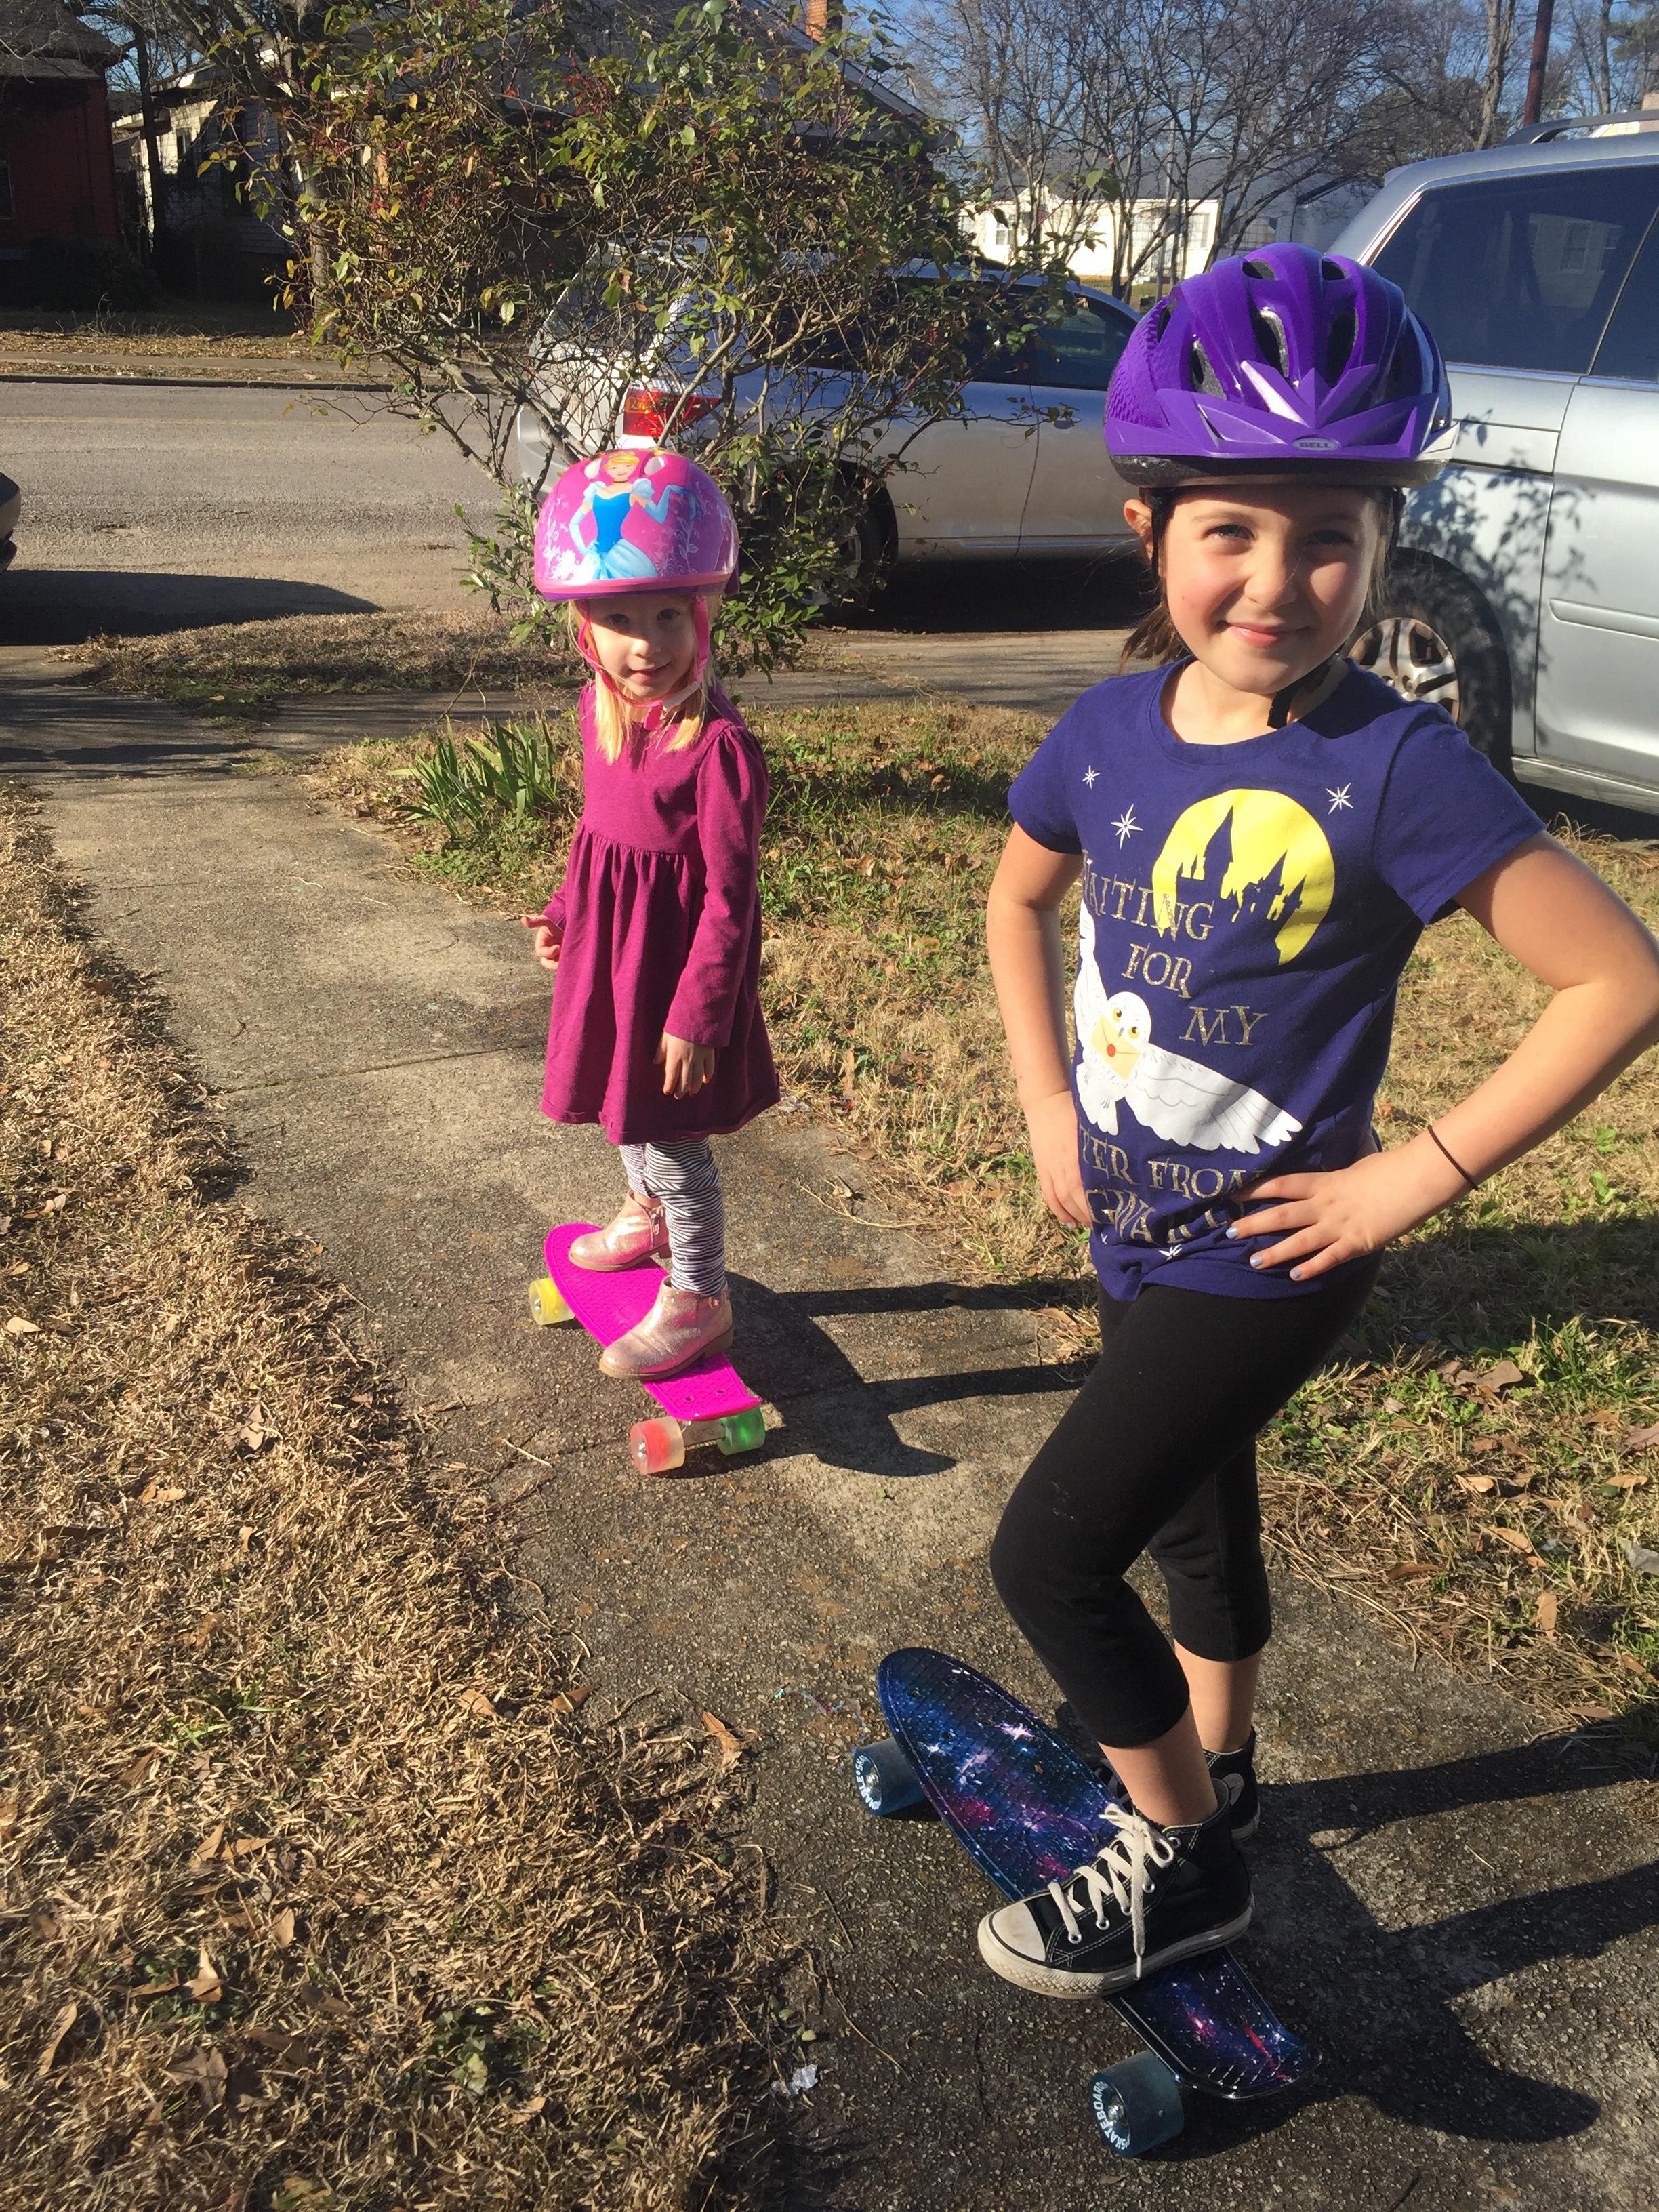 Reagan and Aeryn on skateboards in front of house